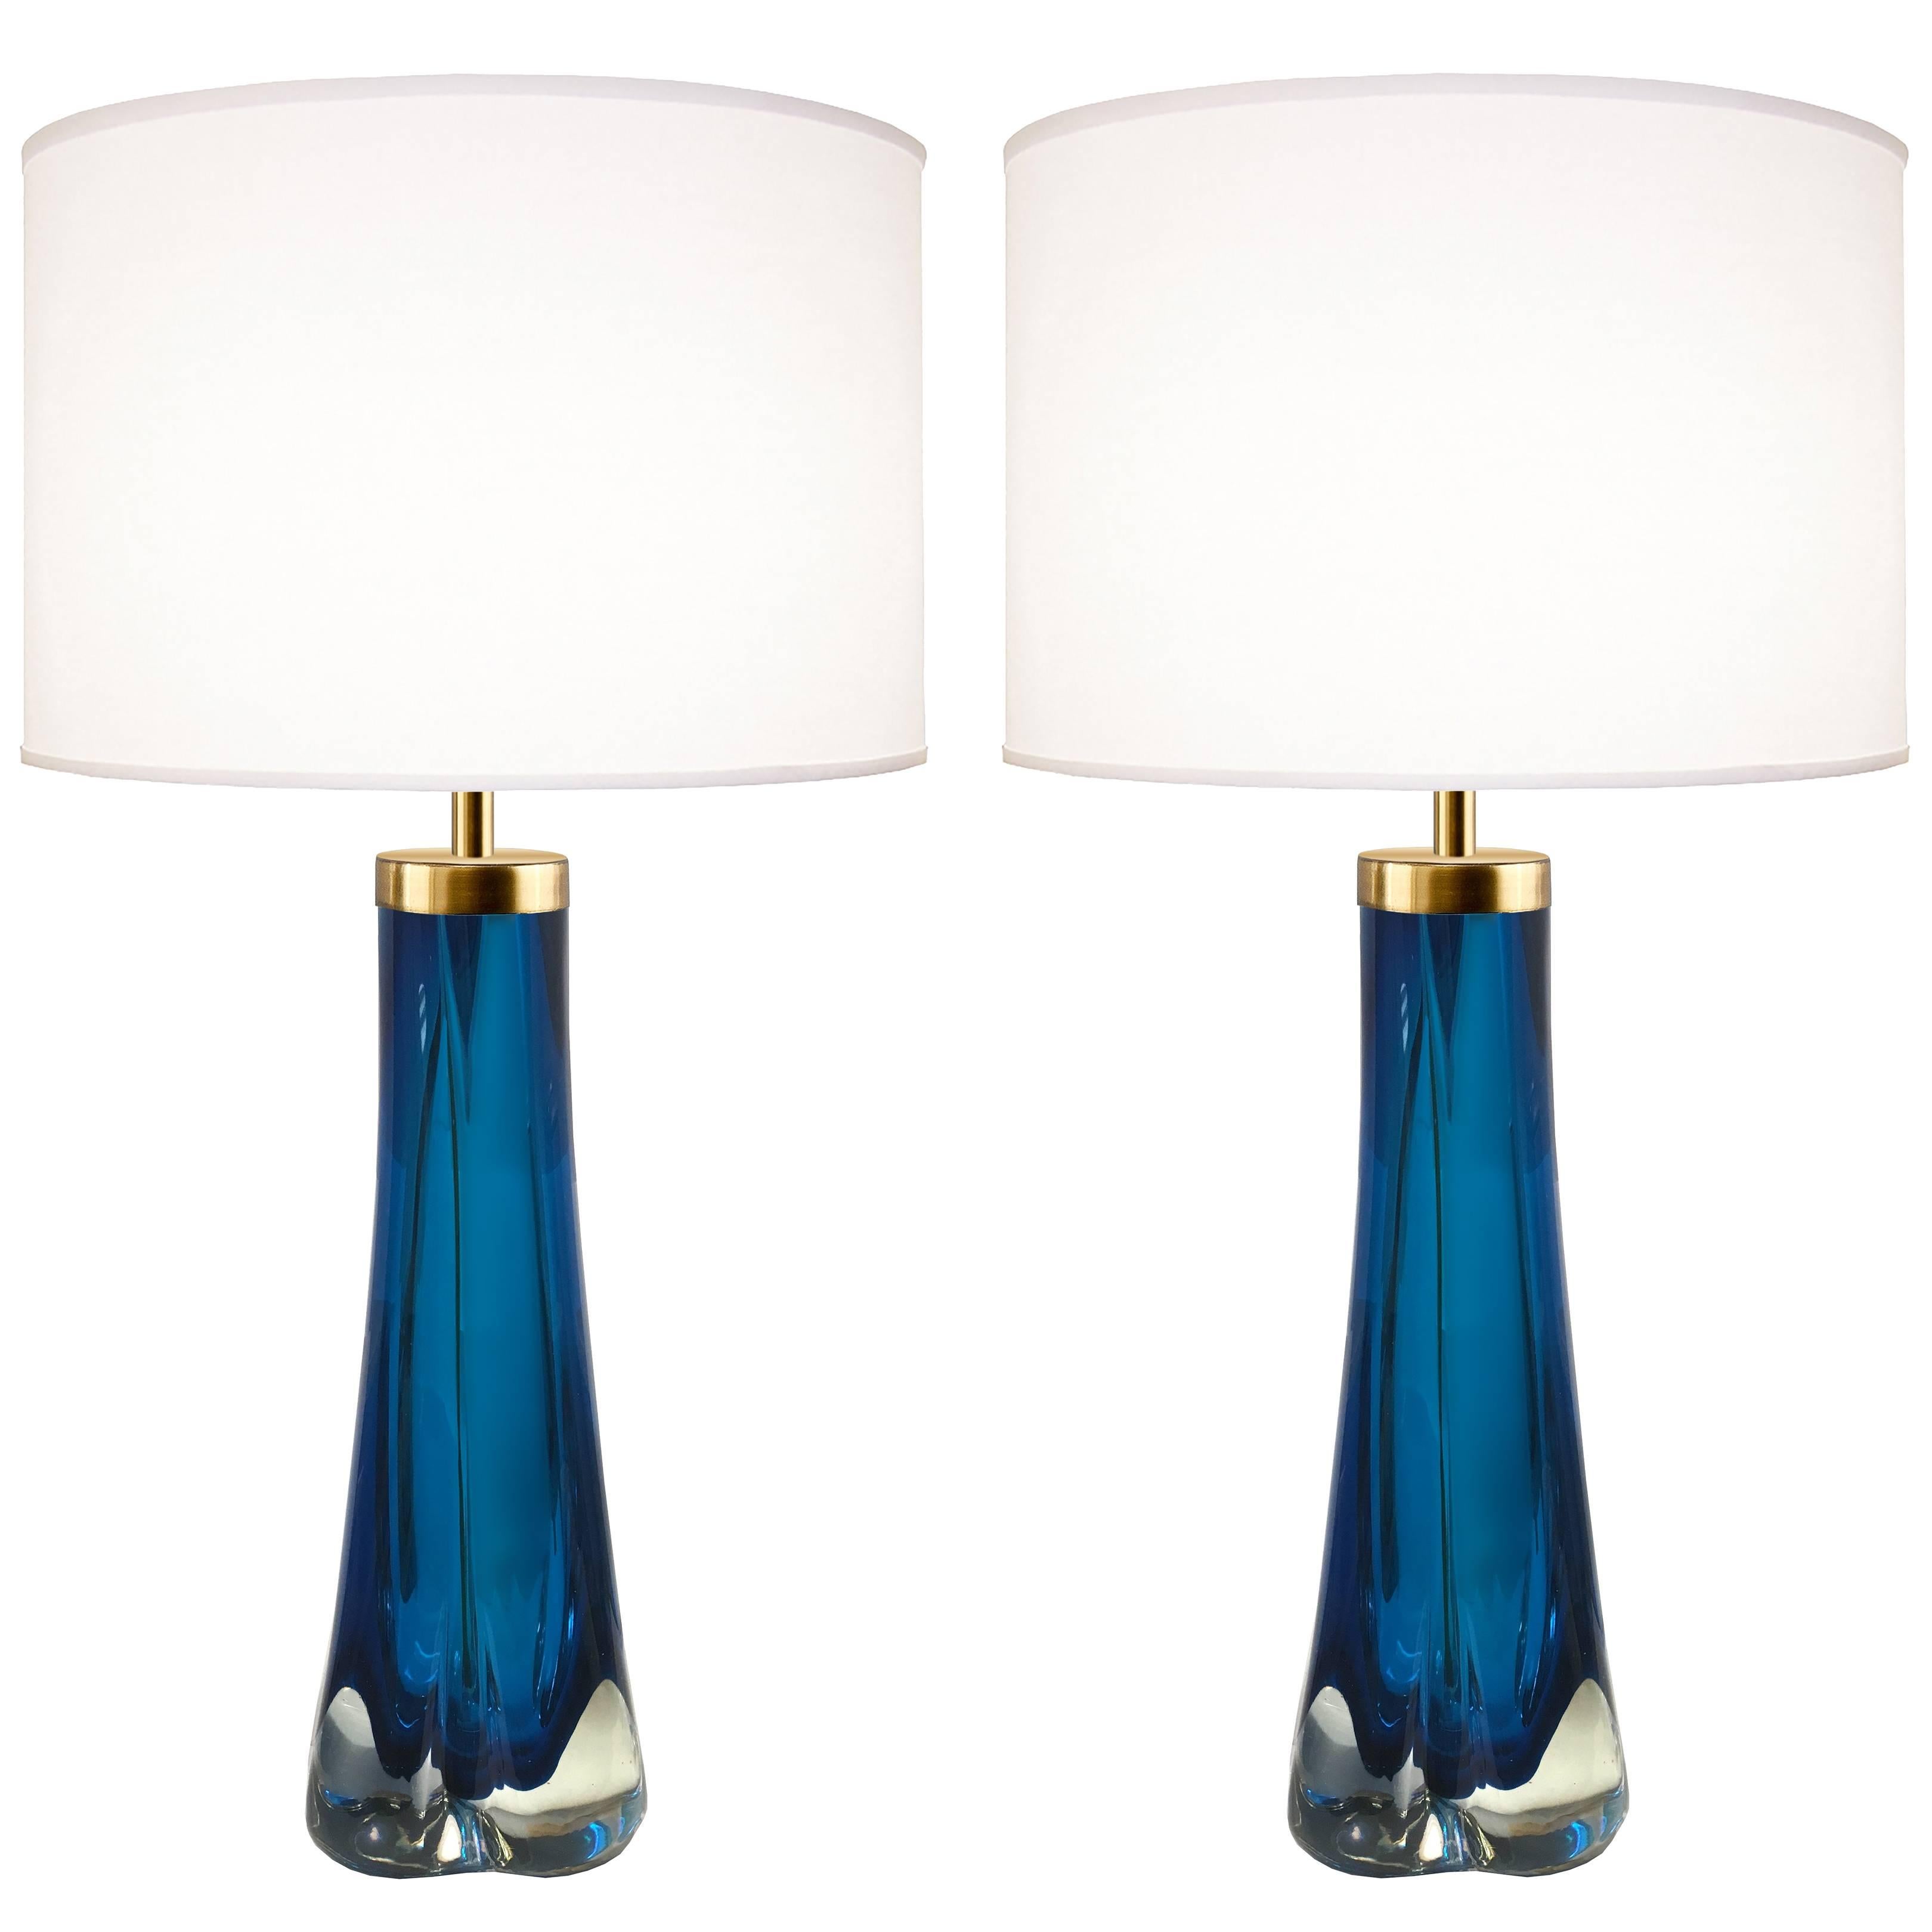 Pair of Thick Cased Blue Glass Lamps from Craig Van Den Brulle to Order For Sale